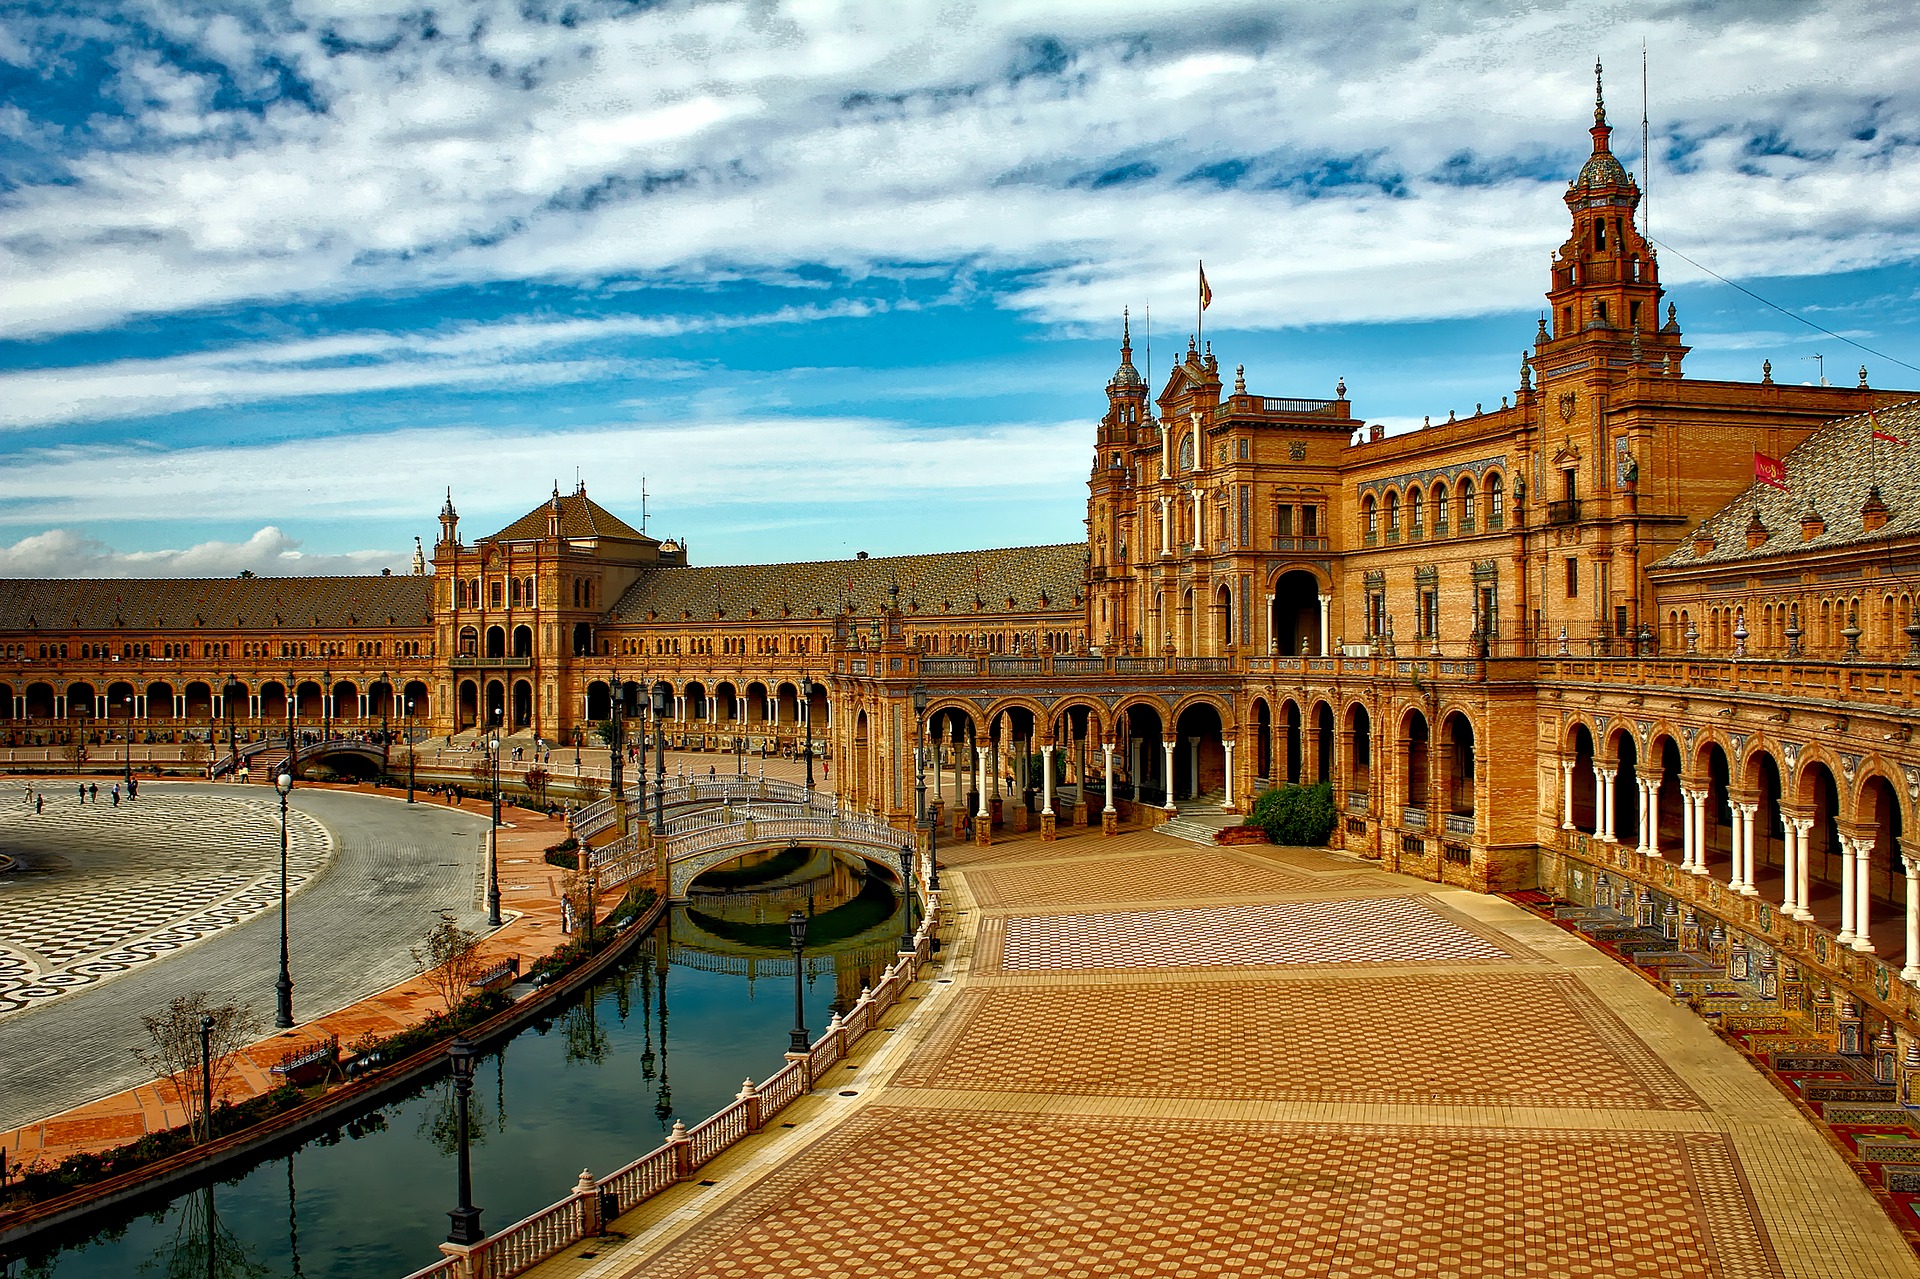 City of Seville: Planning a Trip to Spain to Enjoy Some Rest and Relaxation